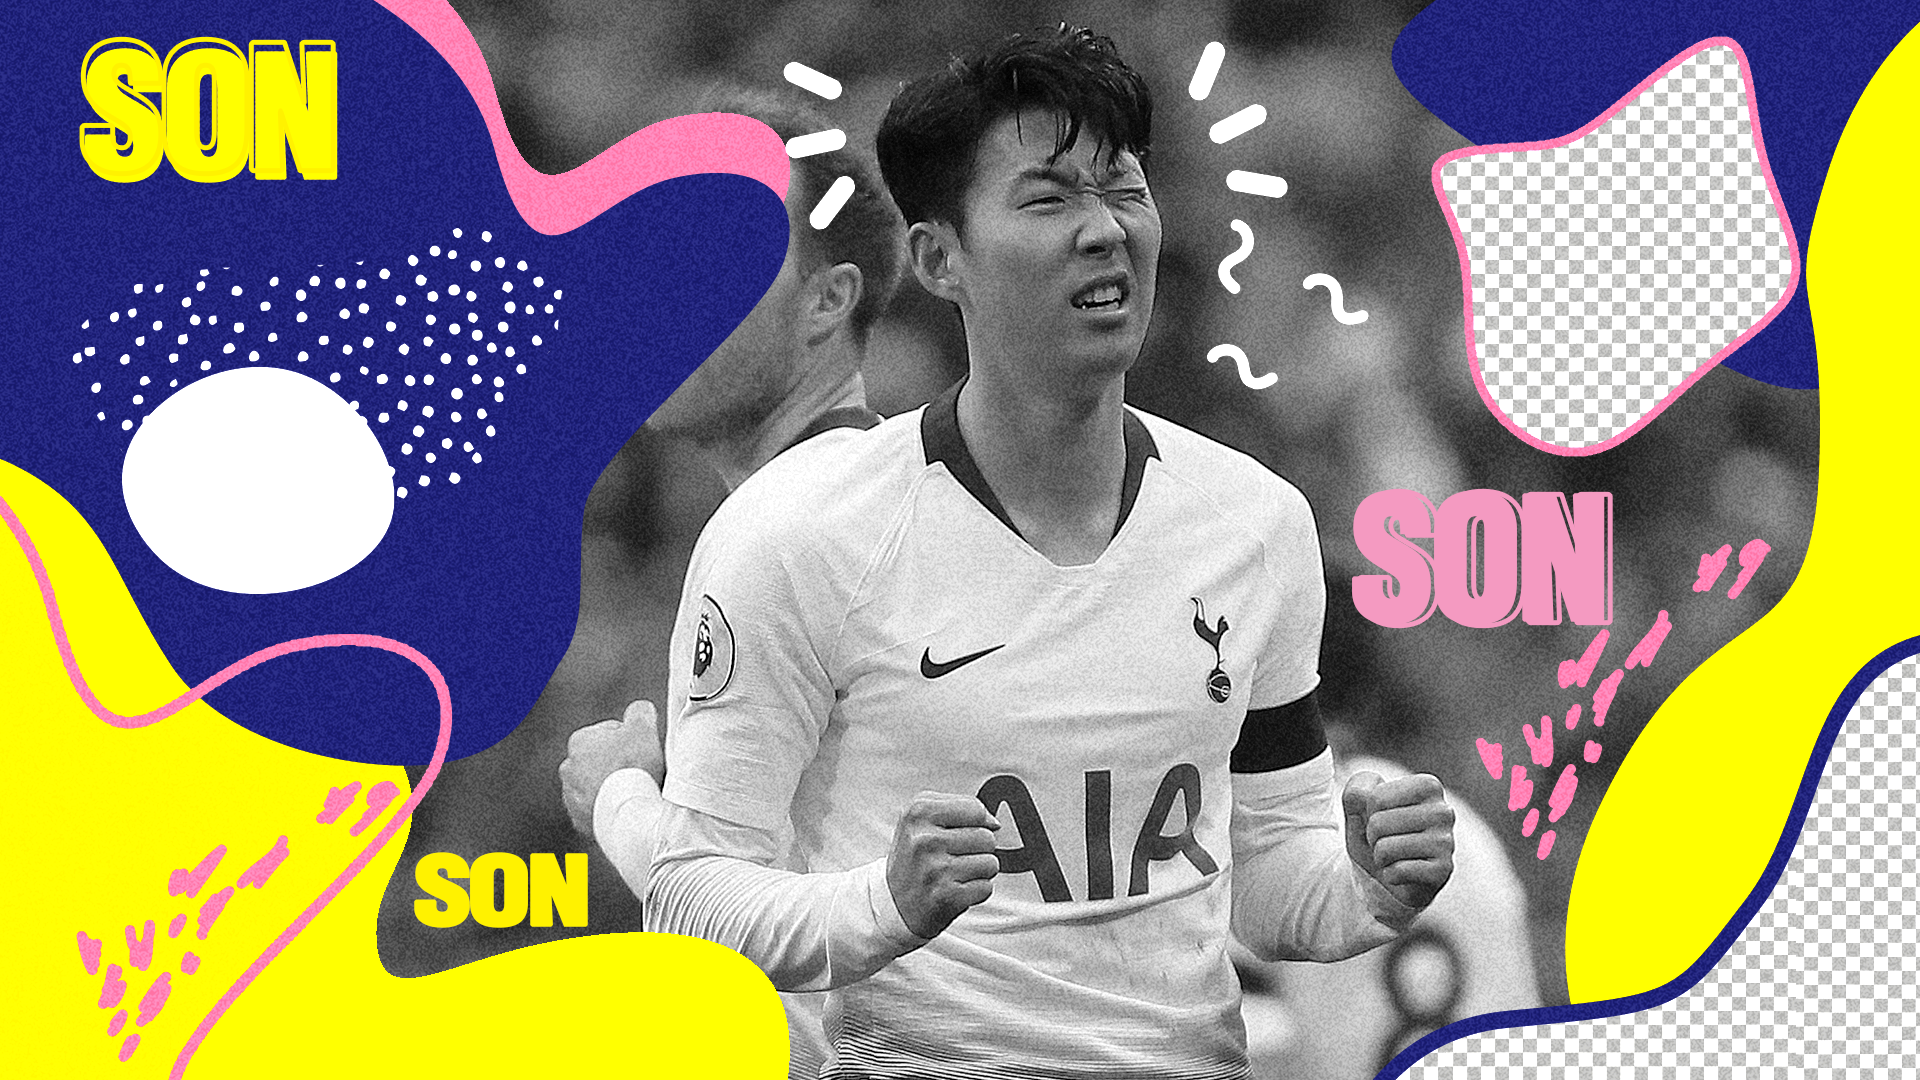 Tottenham star Son Heung-min is a year YOUNGER than he thought